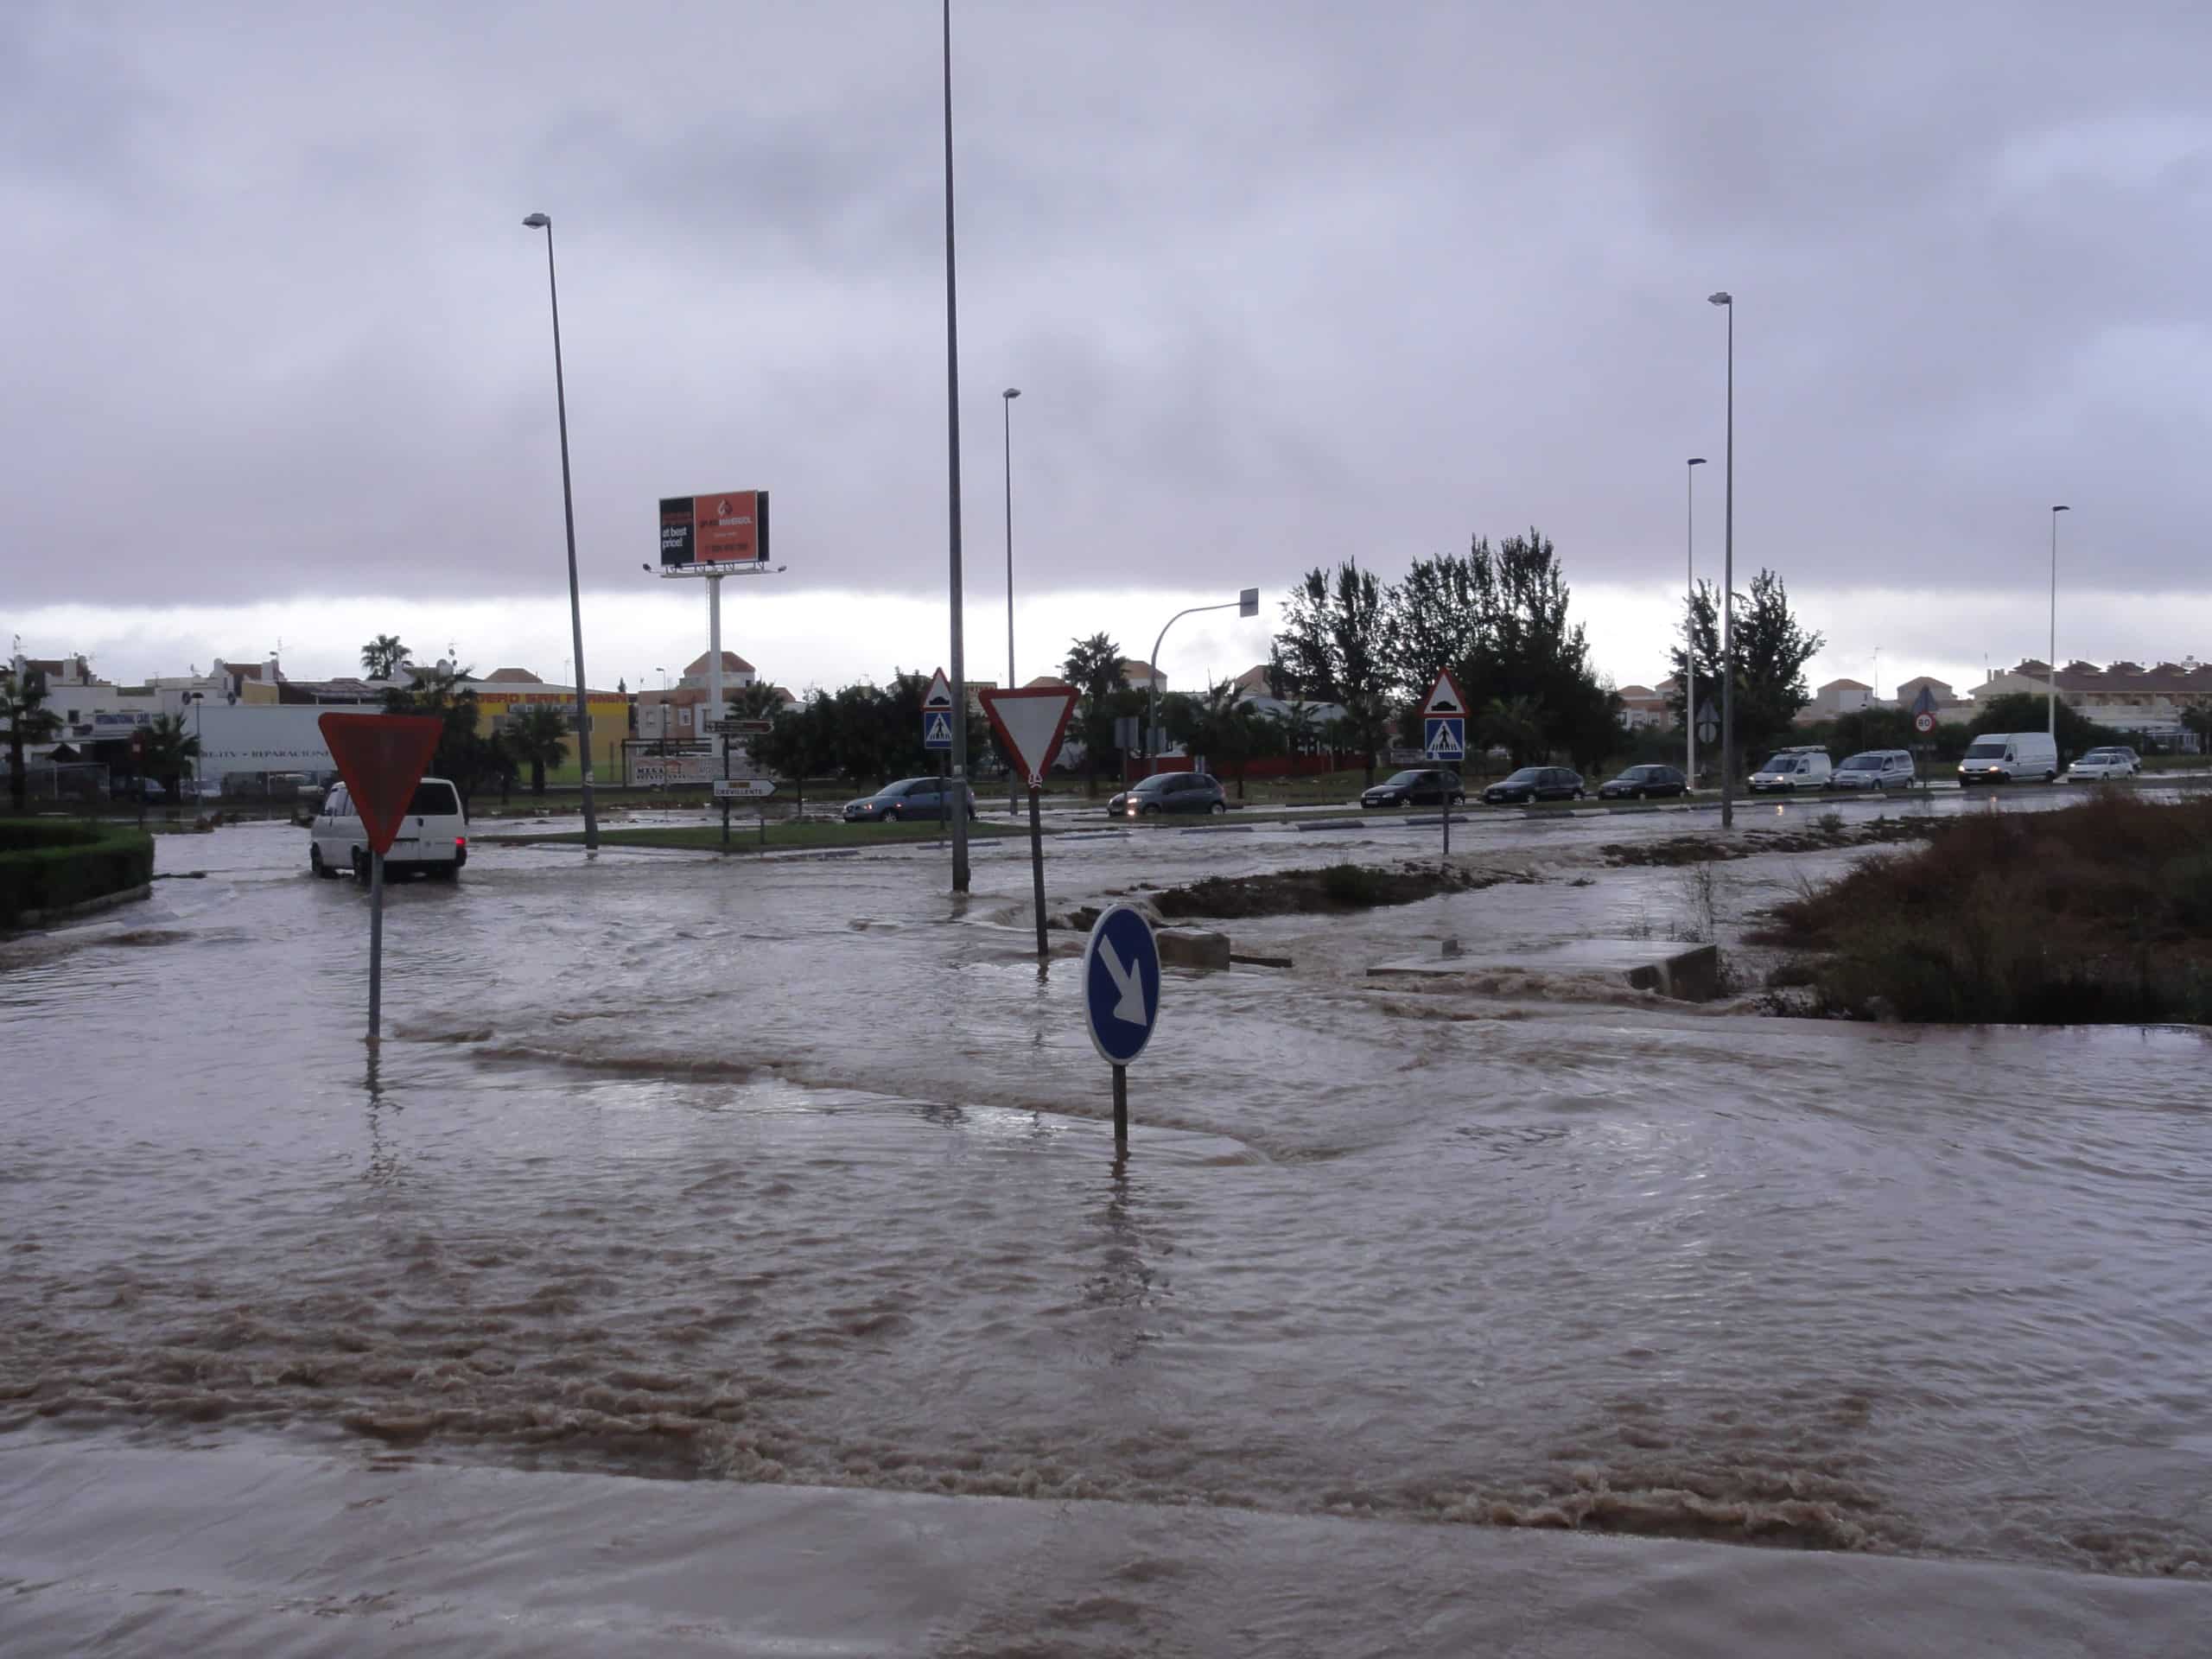 Flooding at the roundabout near the Hiperber supermarket on the border of Lagoons Village